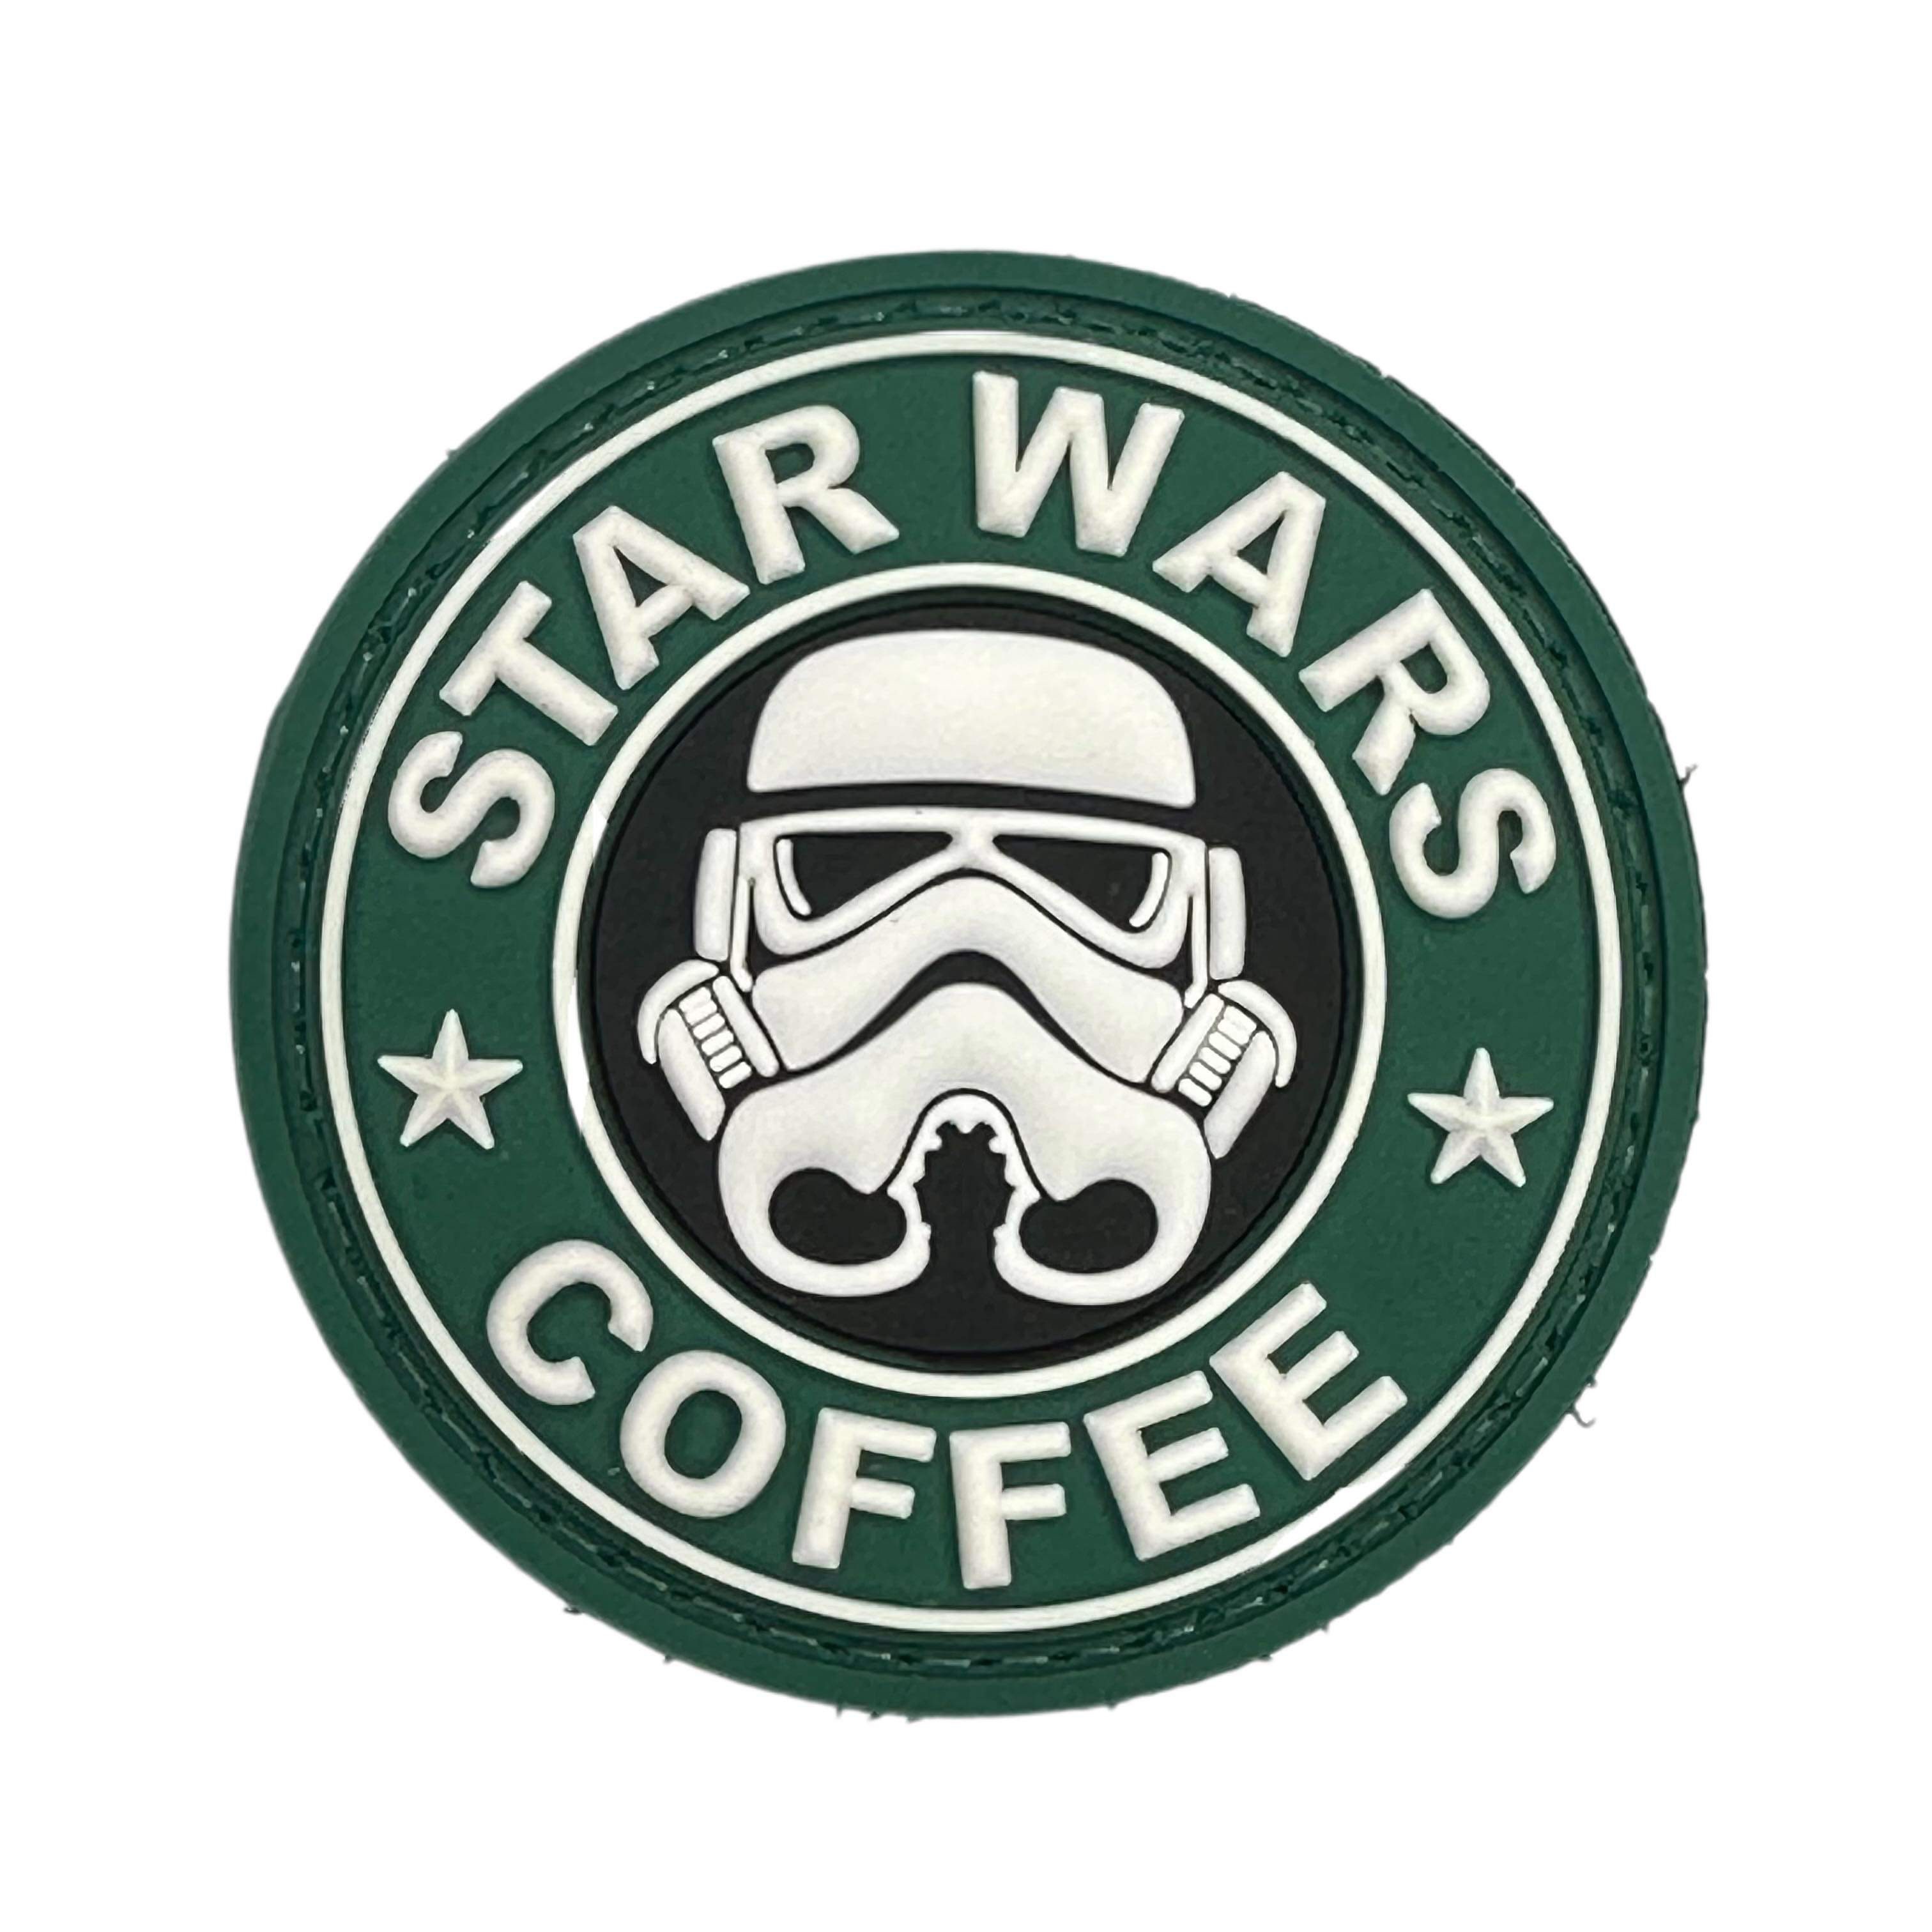 Rubber Patch - Star Wars Coffee